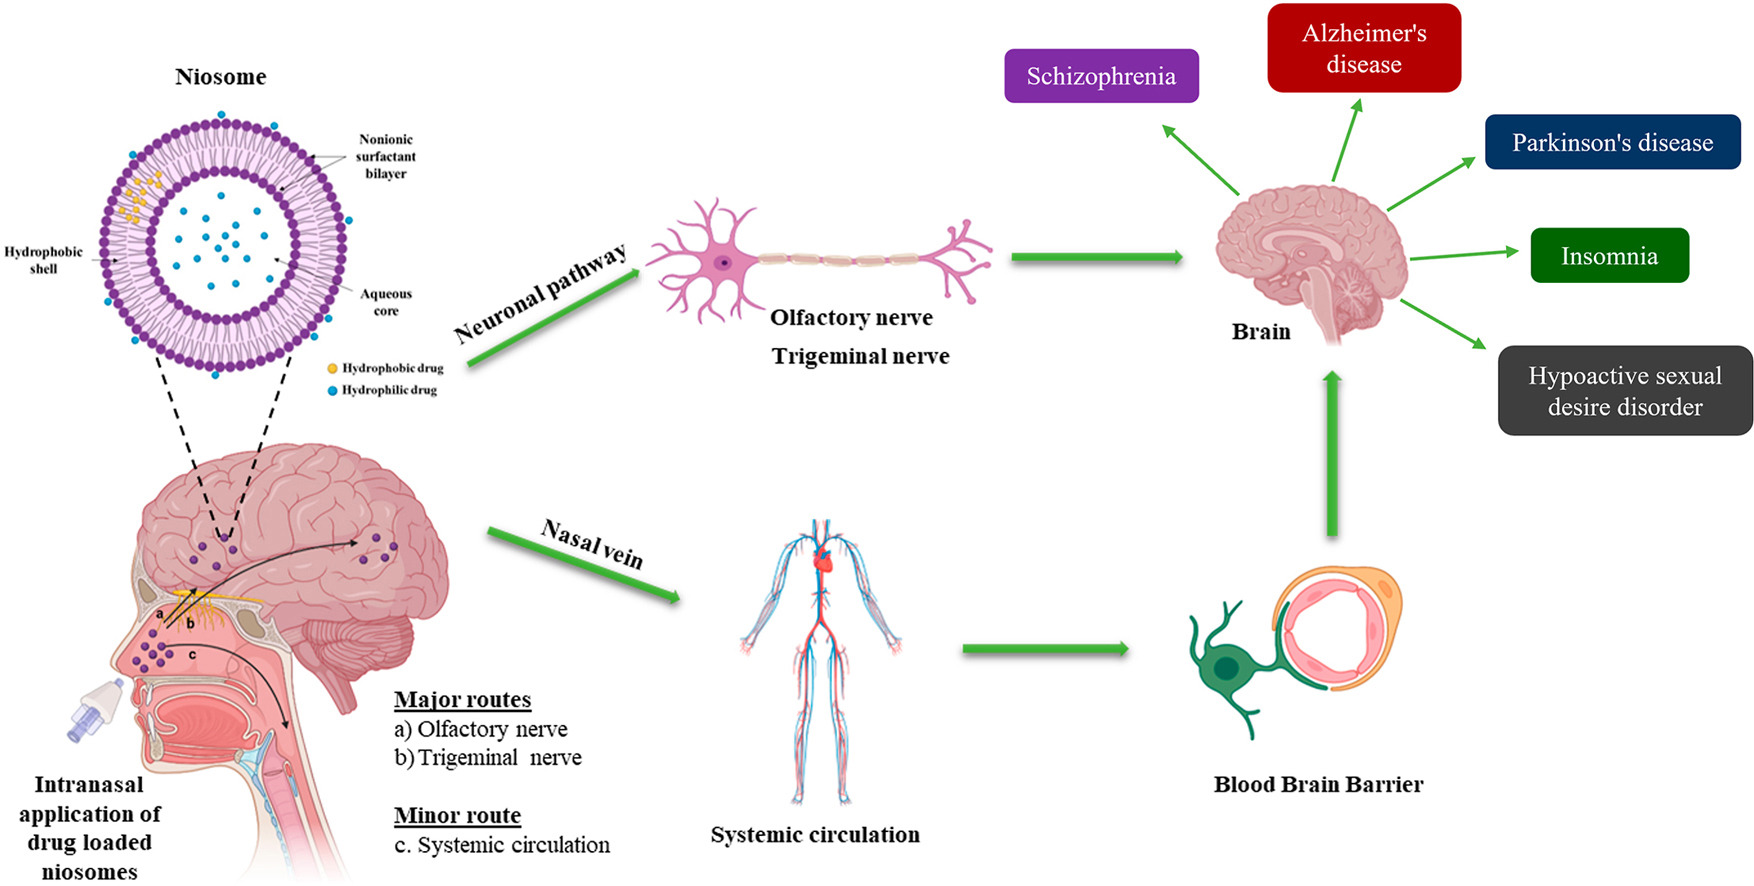 Niosomes for nose-to-brain delivery: A non-invasive versatile carrier system for drug delivery in neurodegenerative diseases